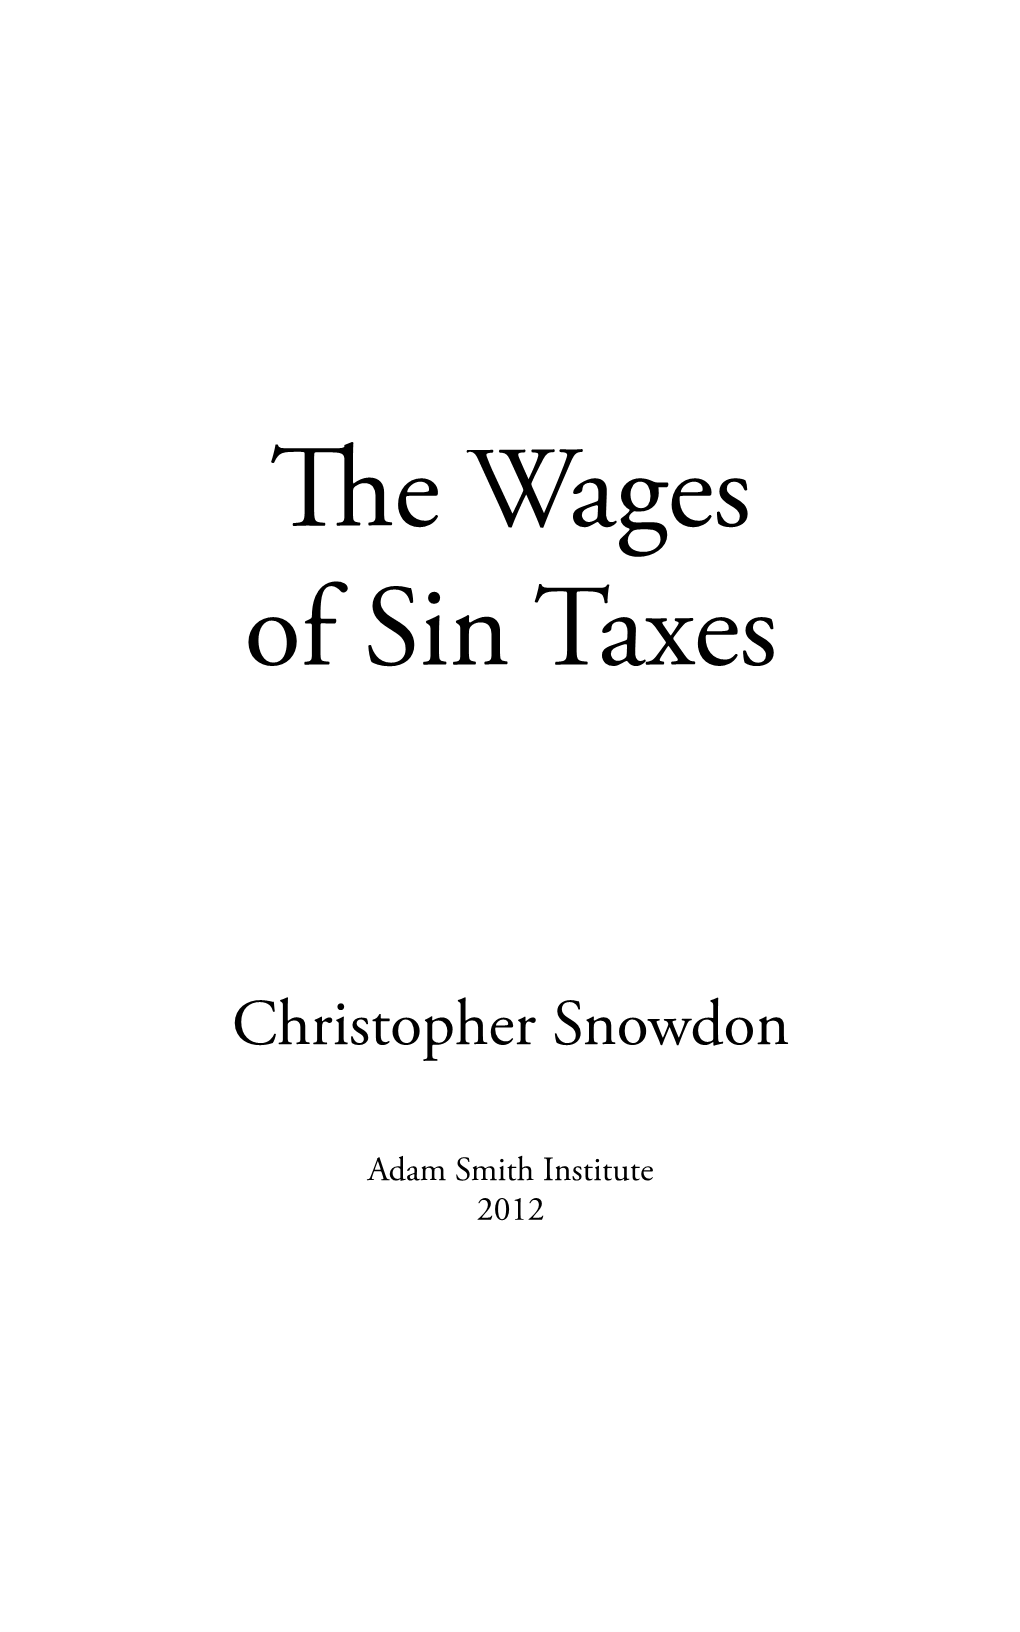 The Wages of Sin Taxes